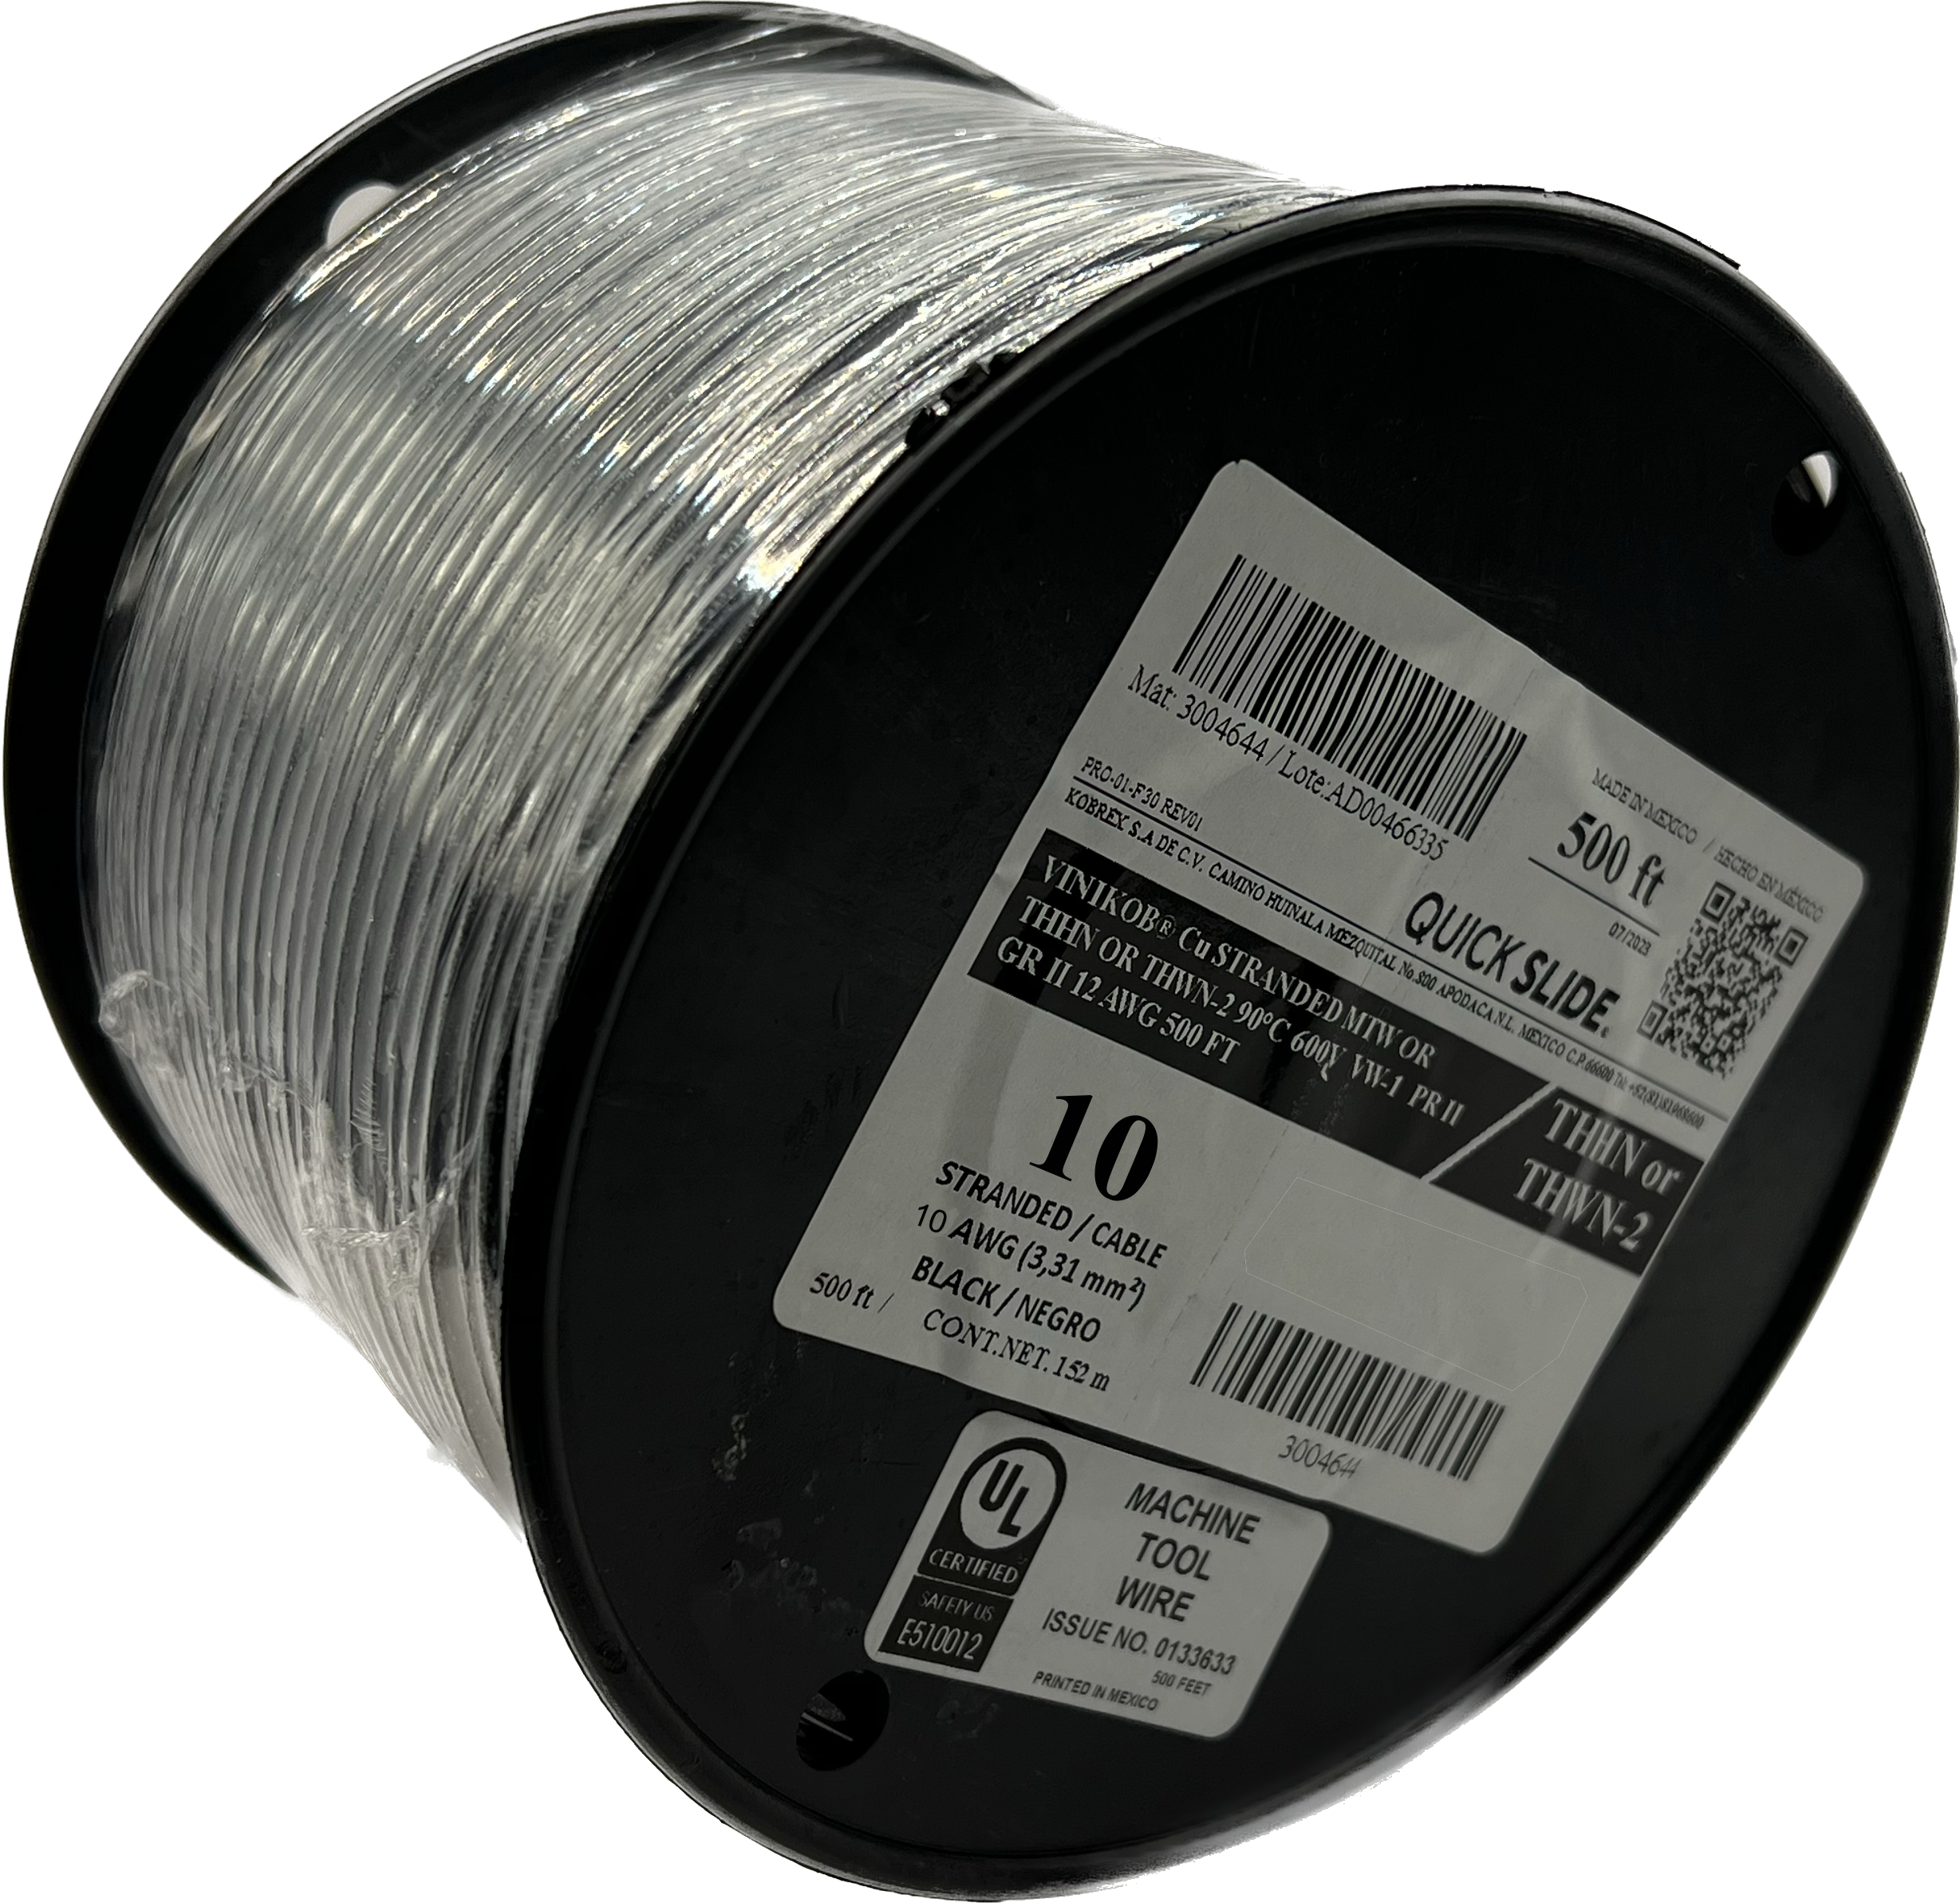 10 AWG THHN Solid Building Wire, 500ft Spool